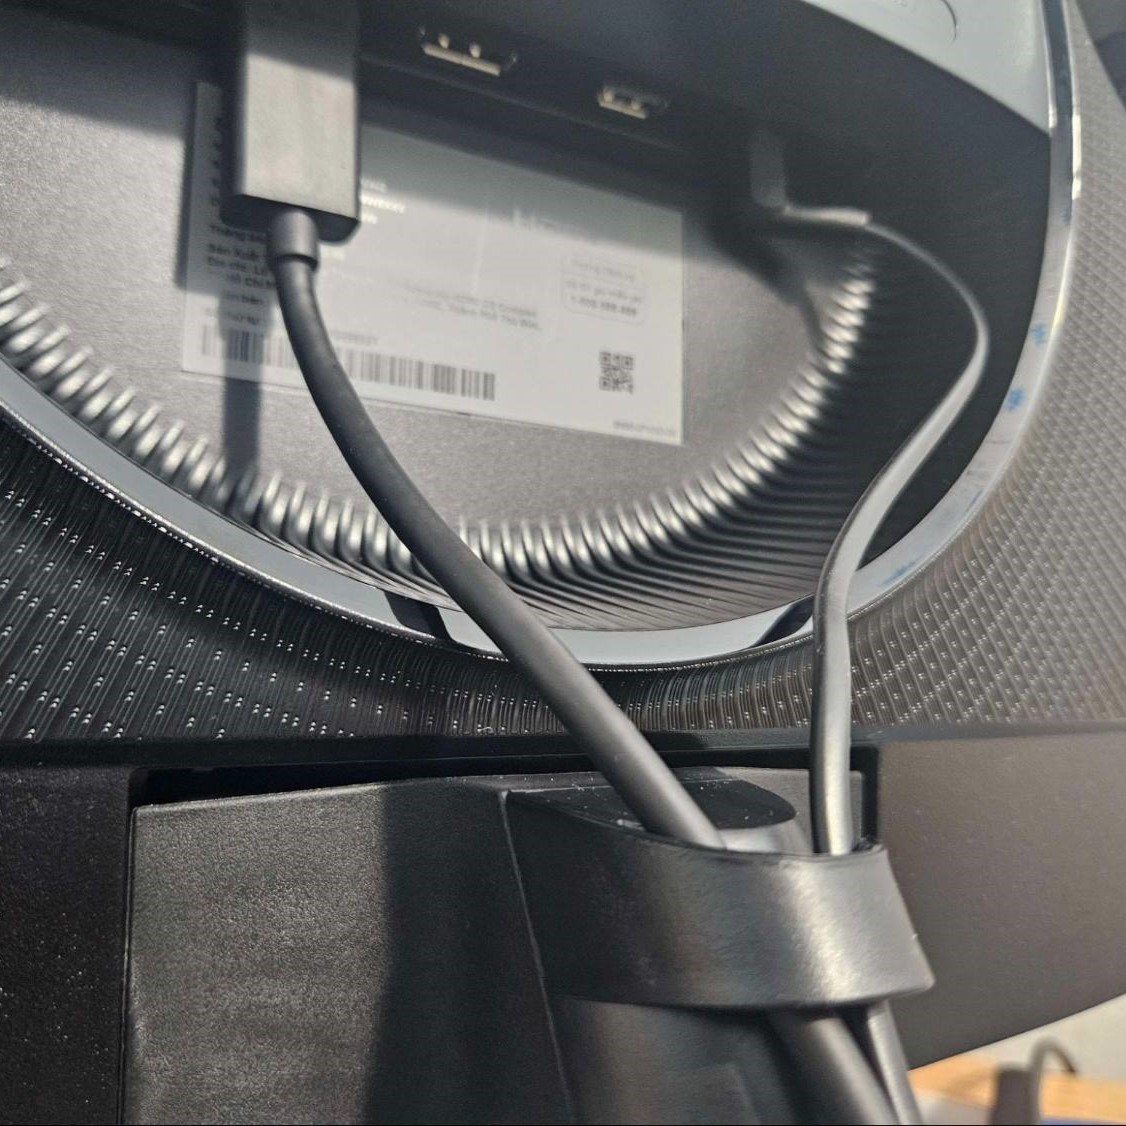 Cable Management on a Monitor